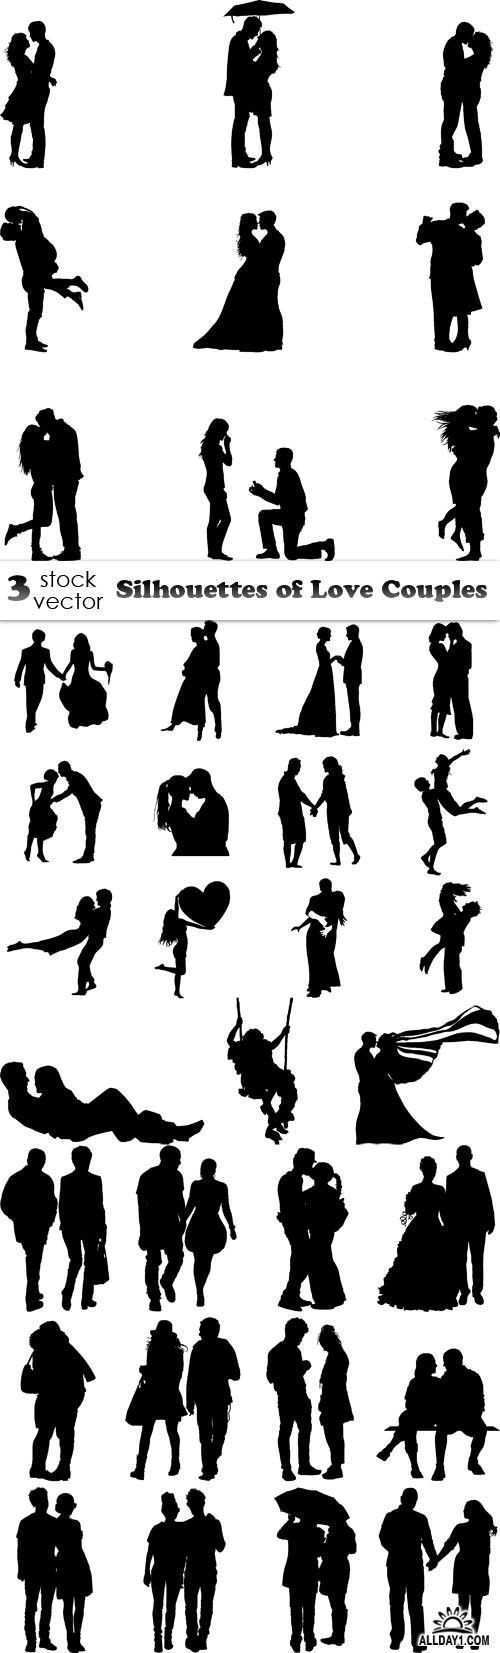 Vectors Silhouettes Of Love Couples Couples Love Silhouettes Vector Vectors Decopodge Lilac Hair In 2020 Leinwand Malerei Diy Schattenbilder Silhouette